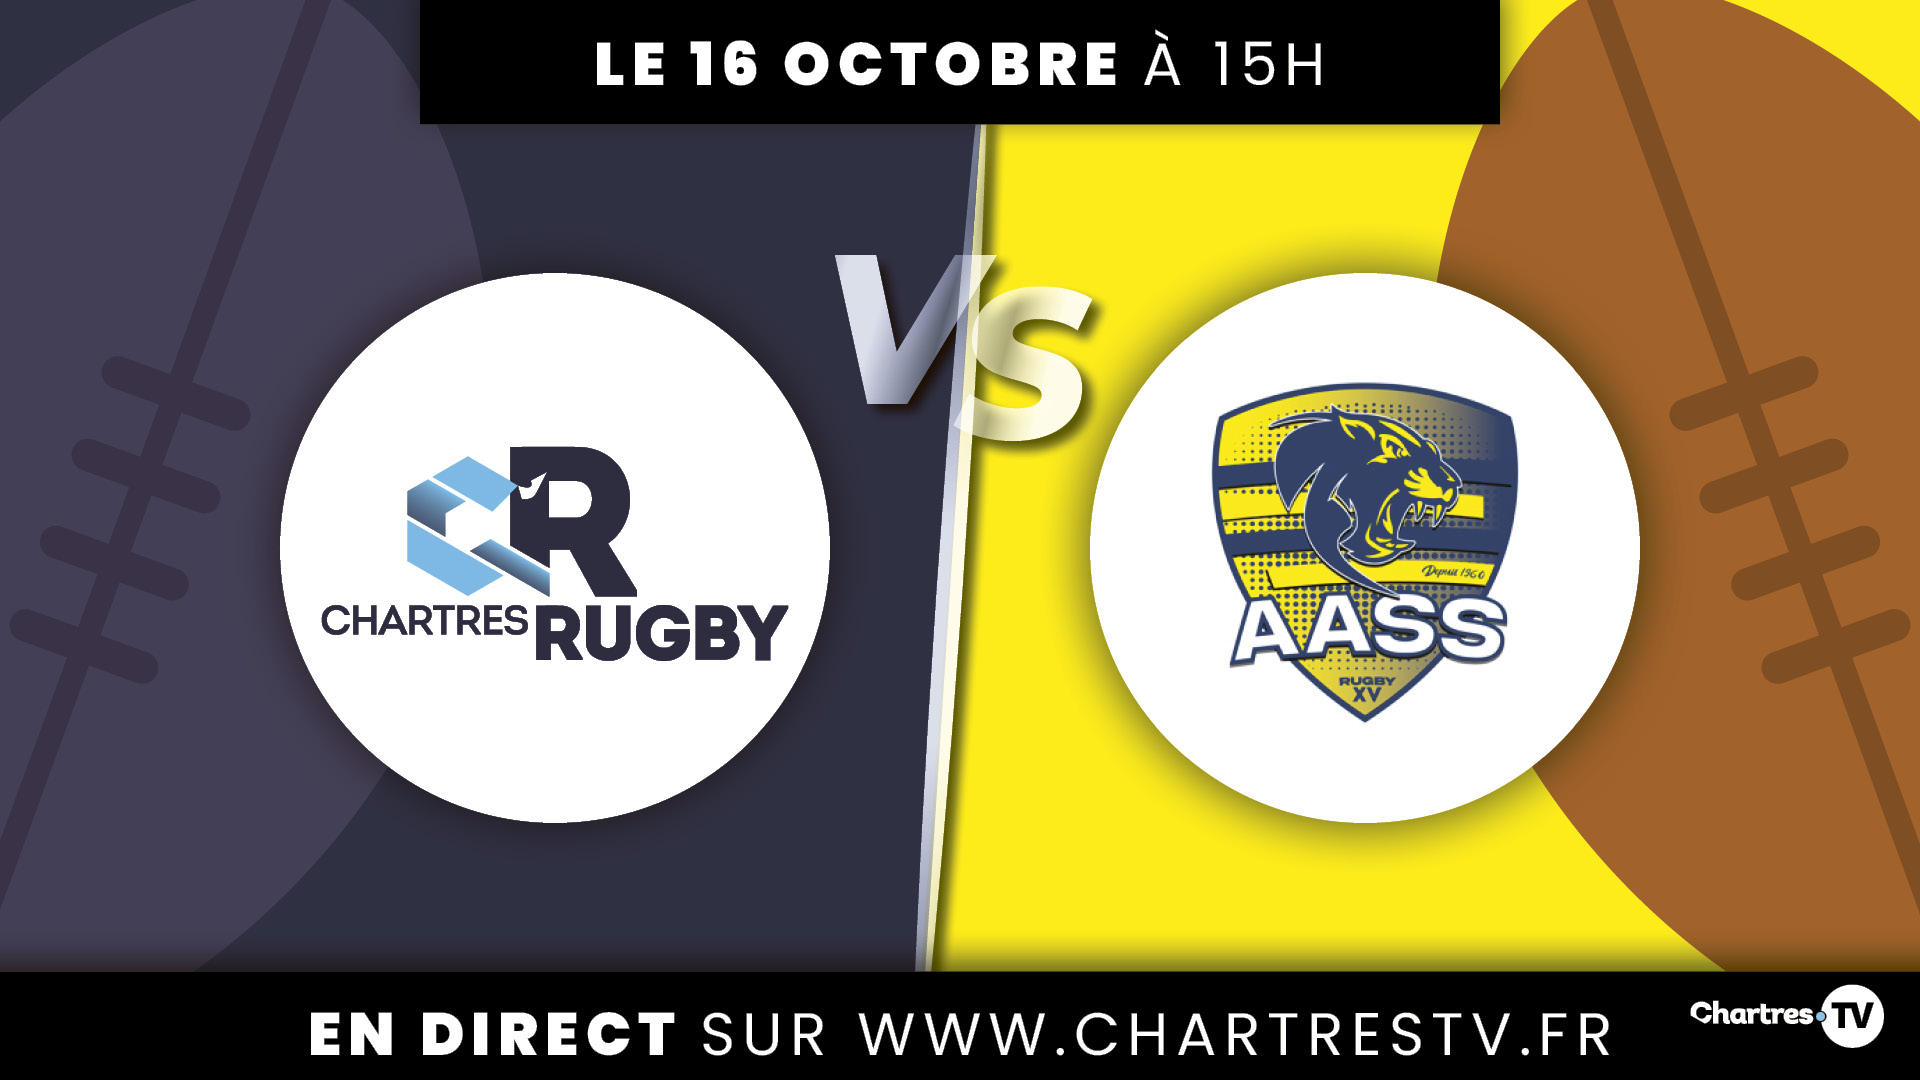 C'Chartres Rugby vs Sarcelles